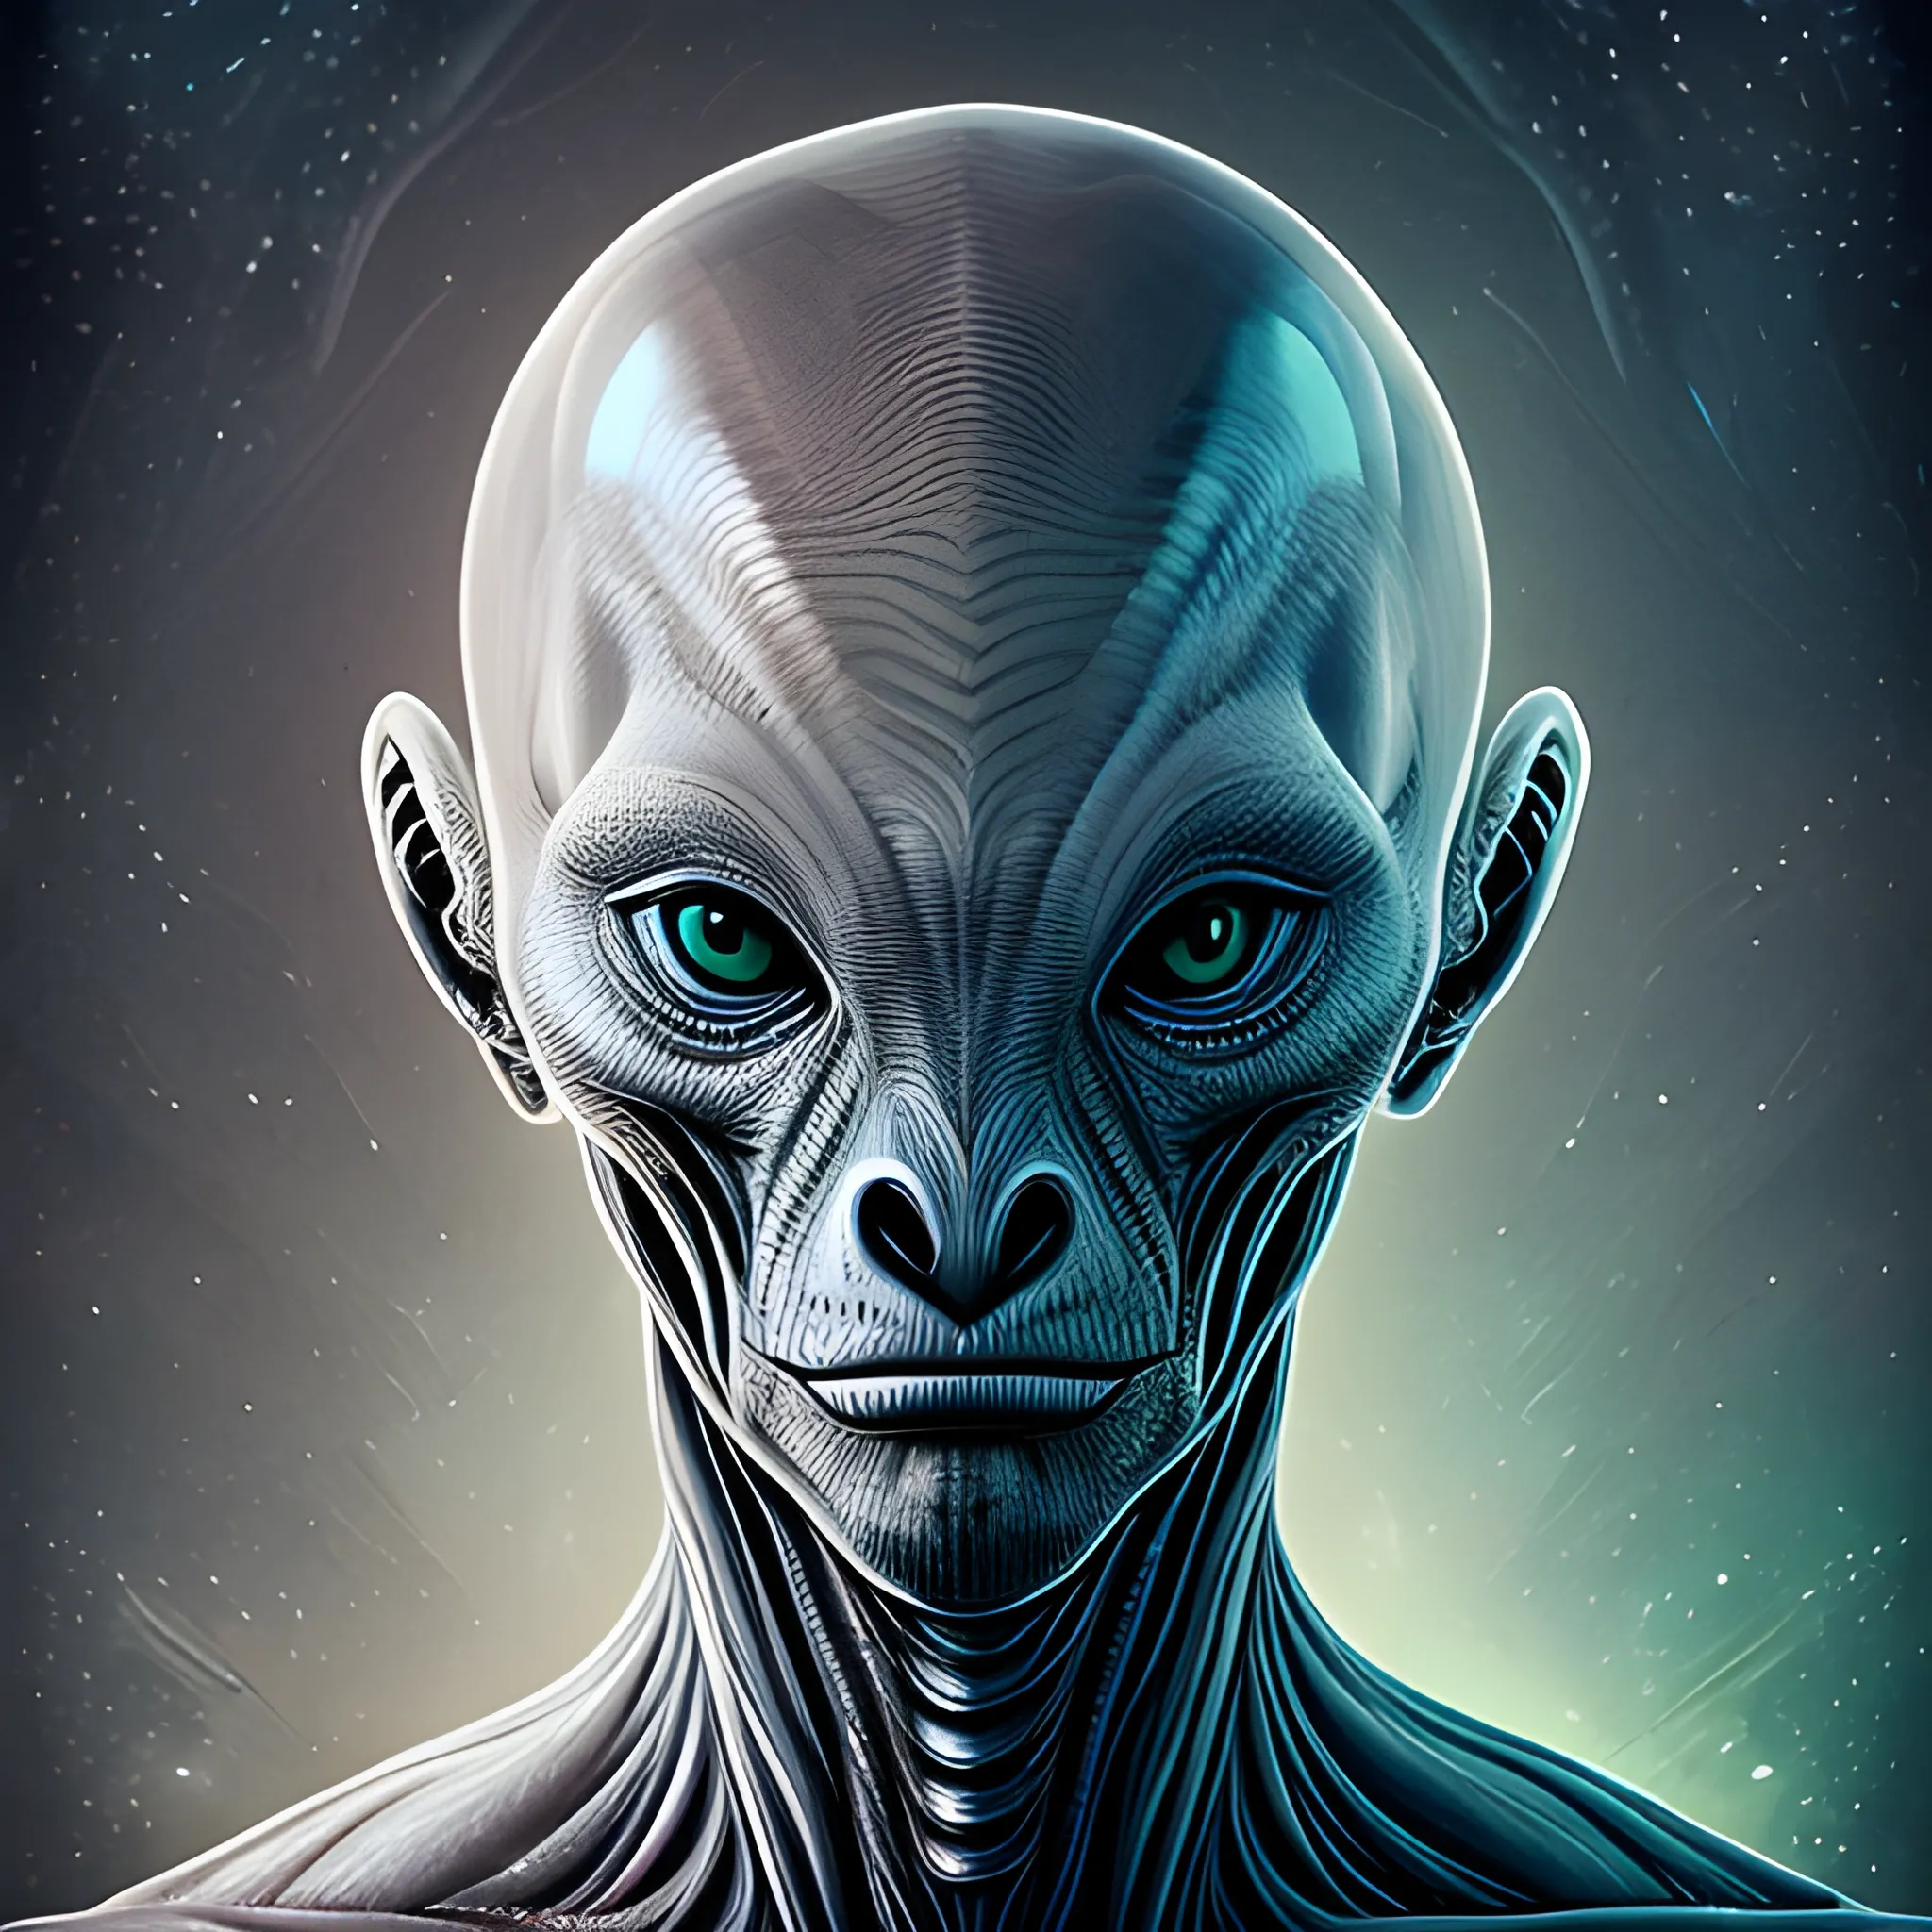 A detailed and intricate digital art piece in a cinematic style, this ultra high resolution portrait of an alien beast is a true masterpiece